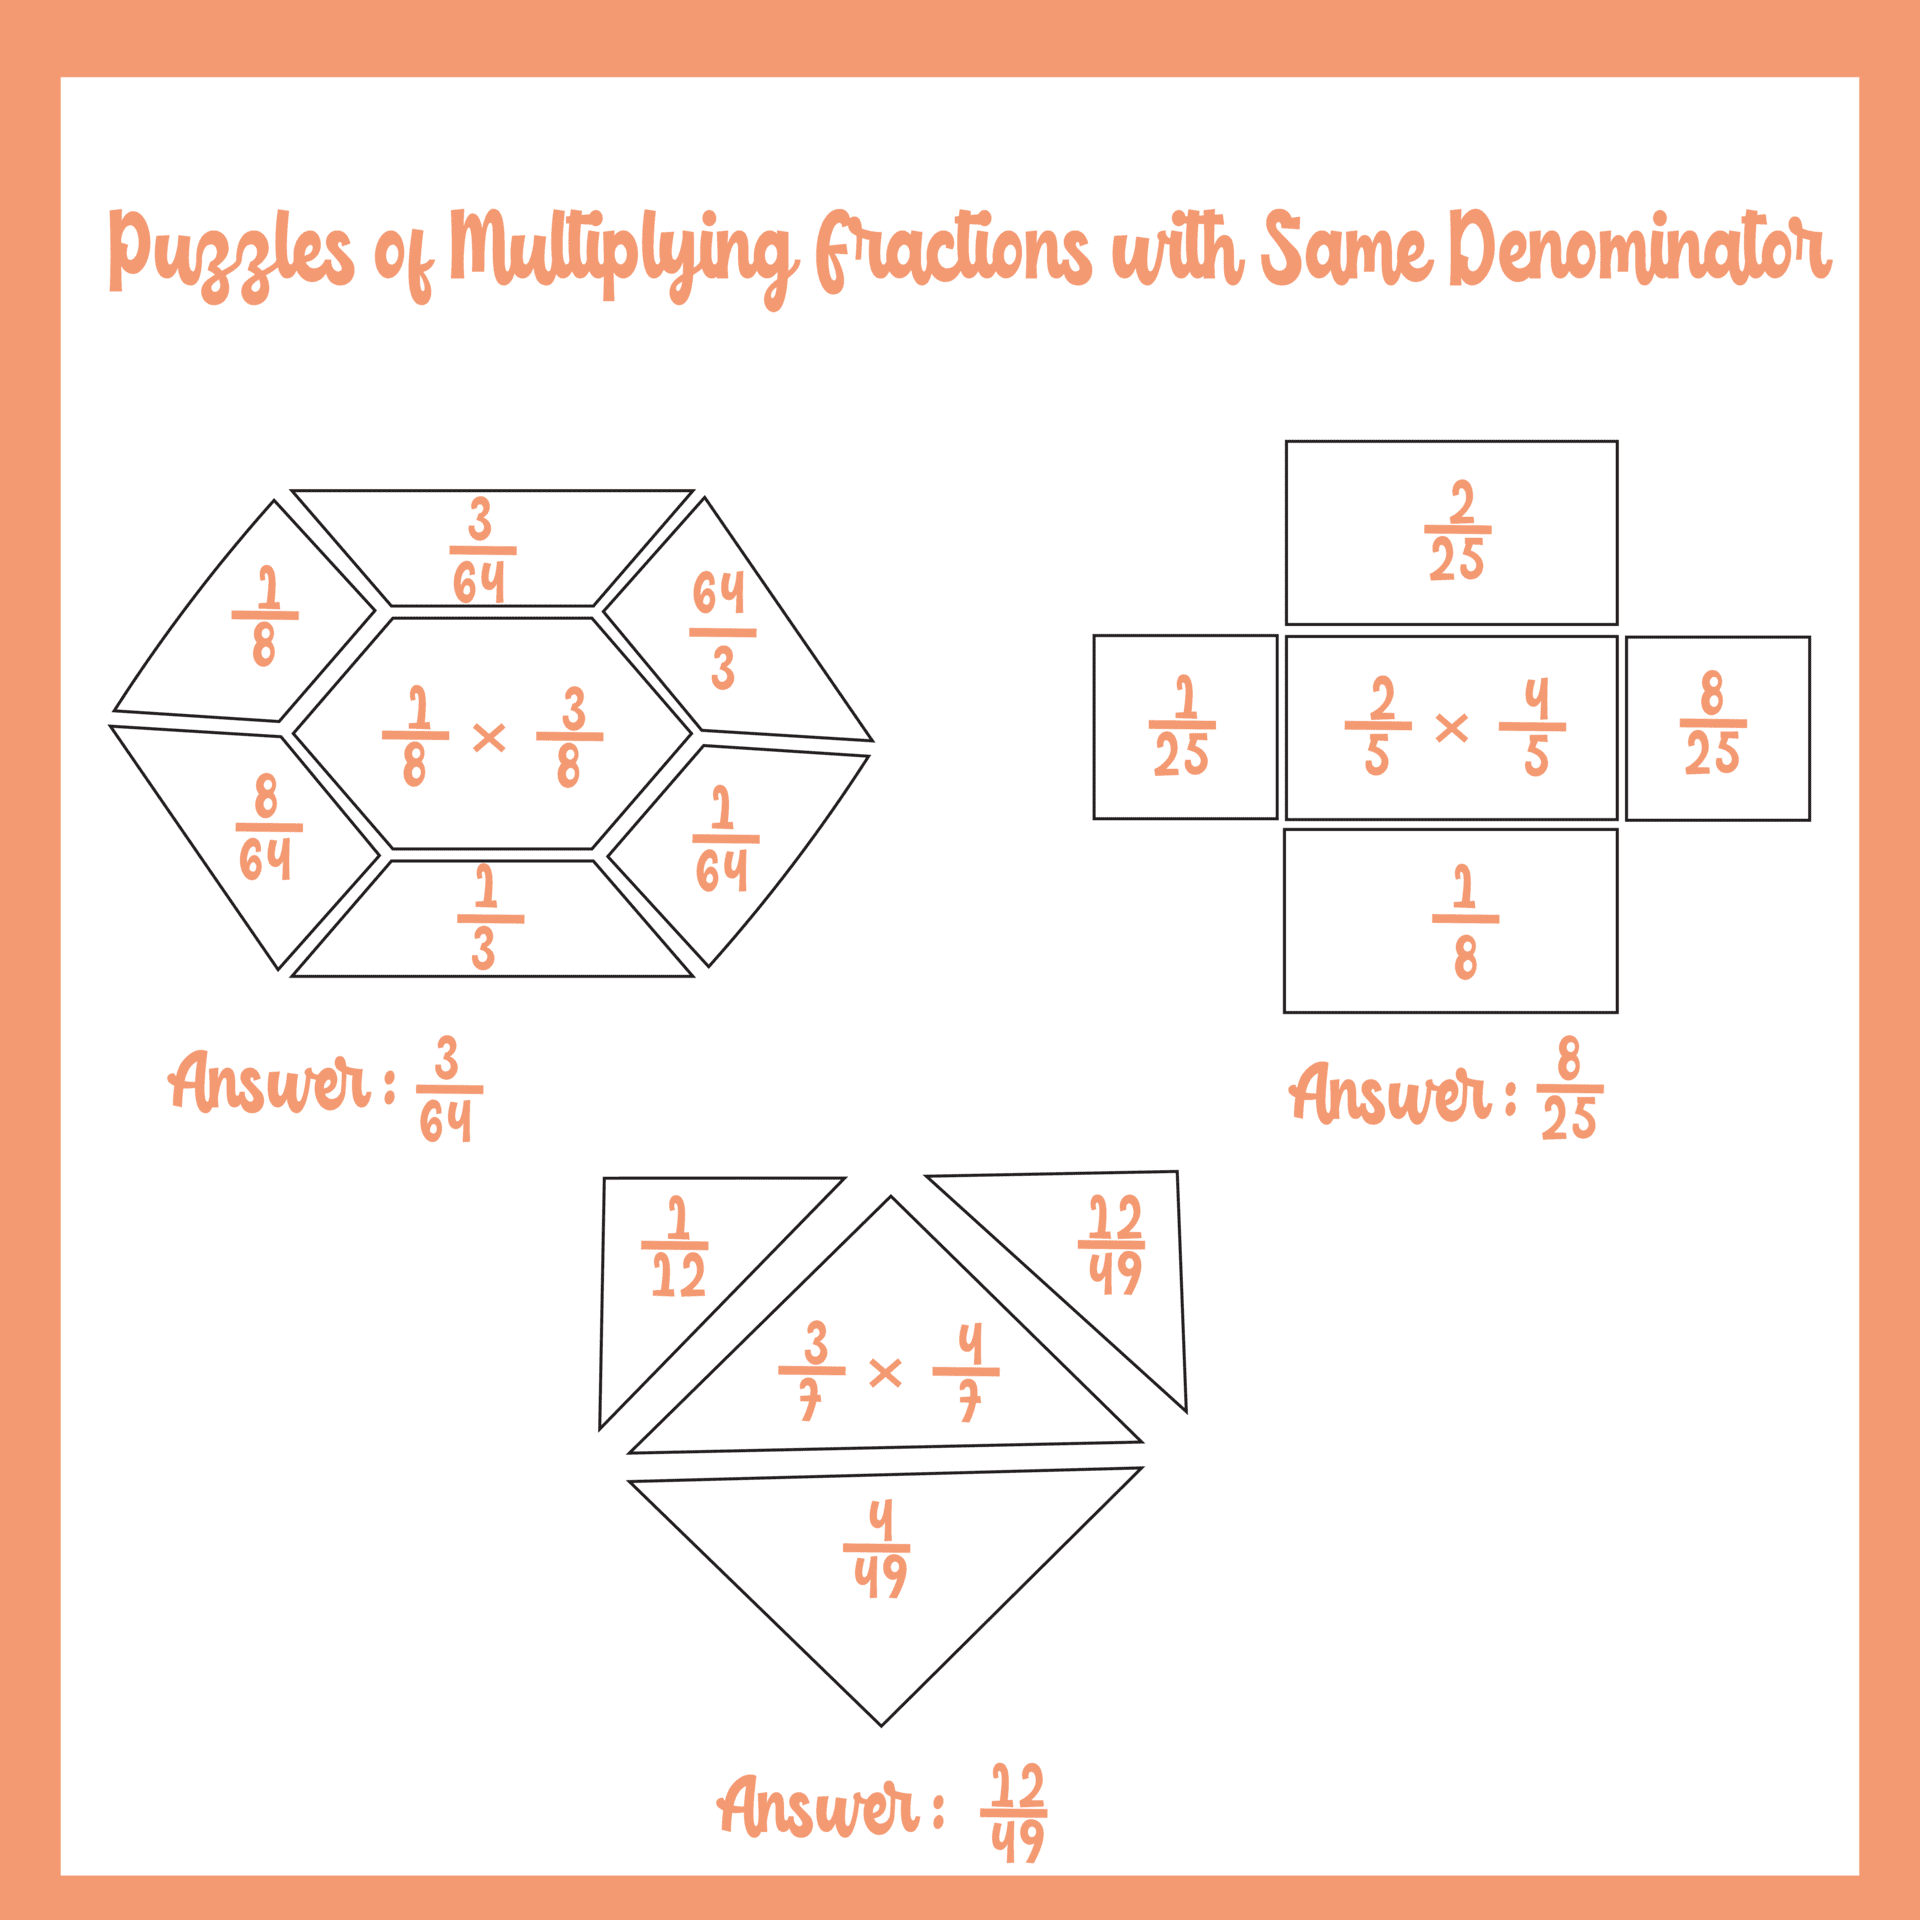 using puzzles to describe Multiplying Fractions with Same Denominators Worksheets